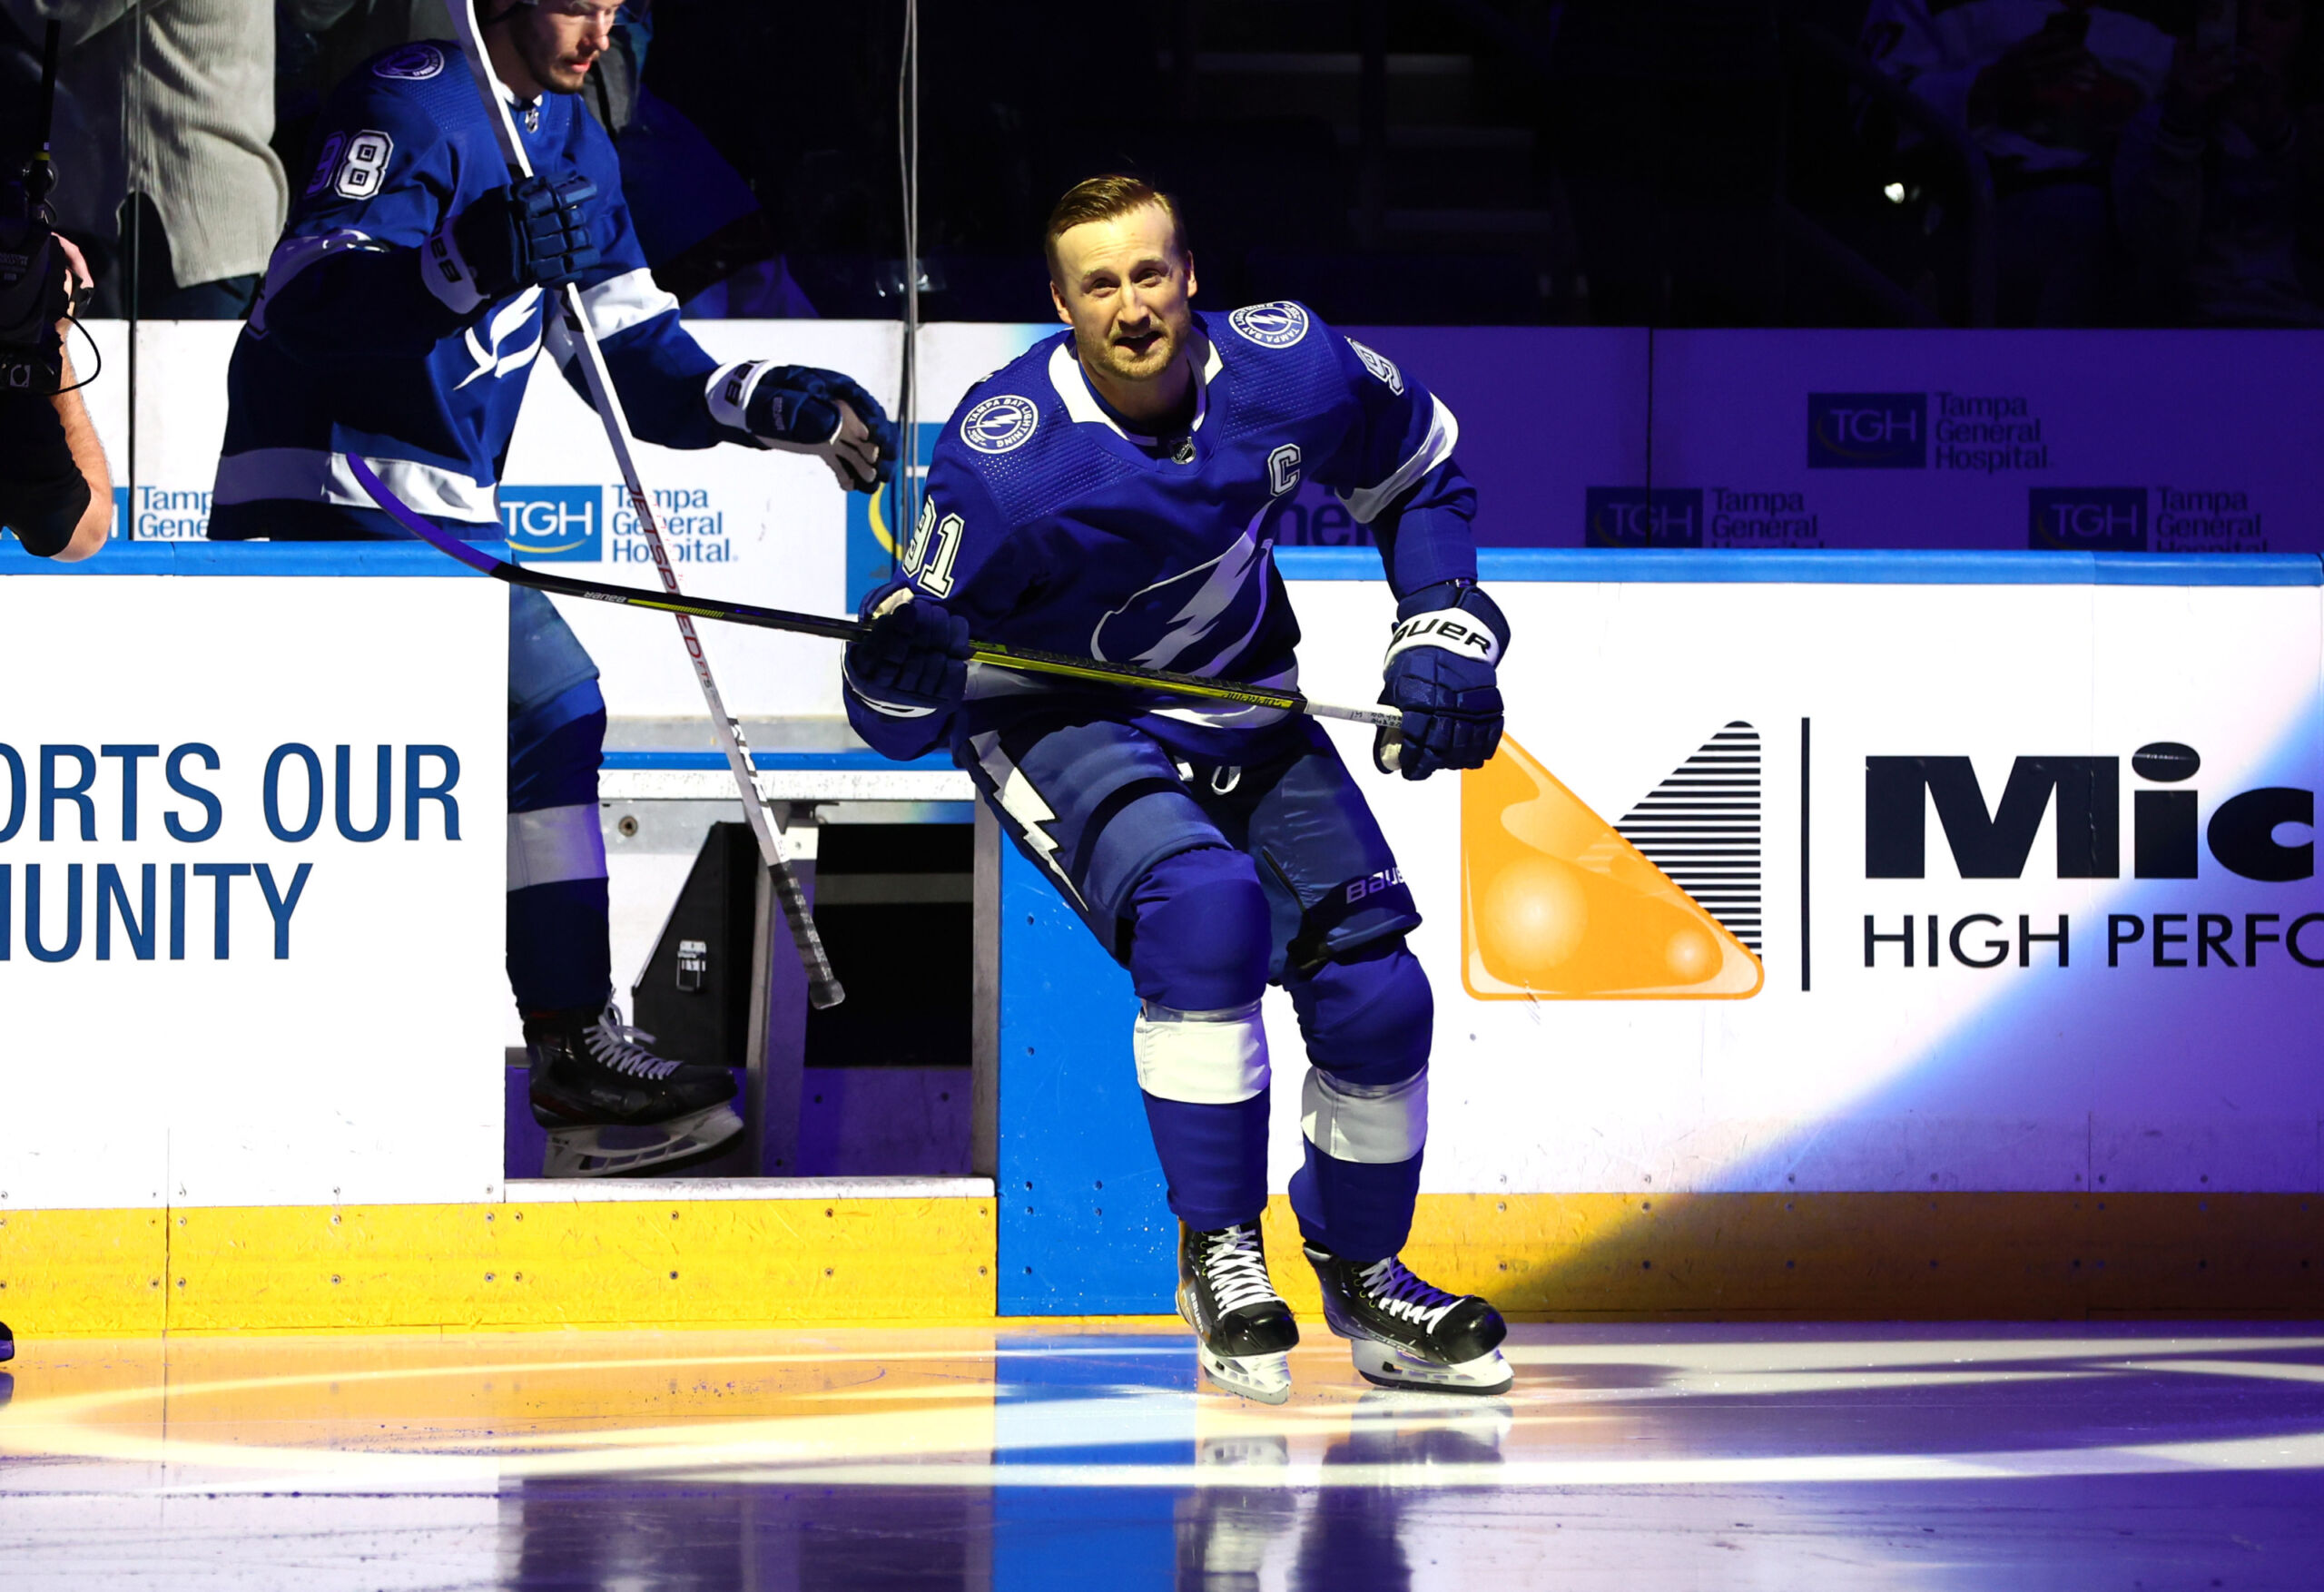 Steven Stamkos offers 'disappointed' take on Lightning extension talks